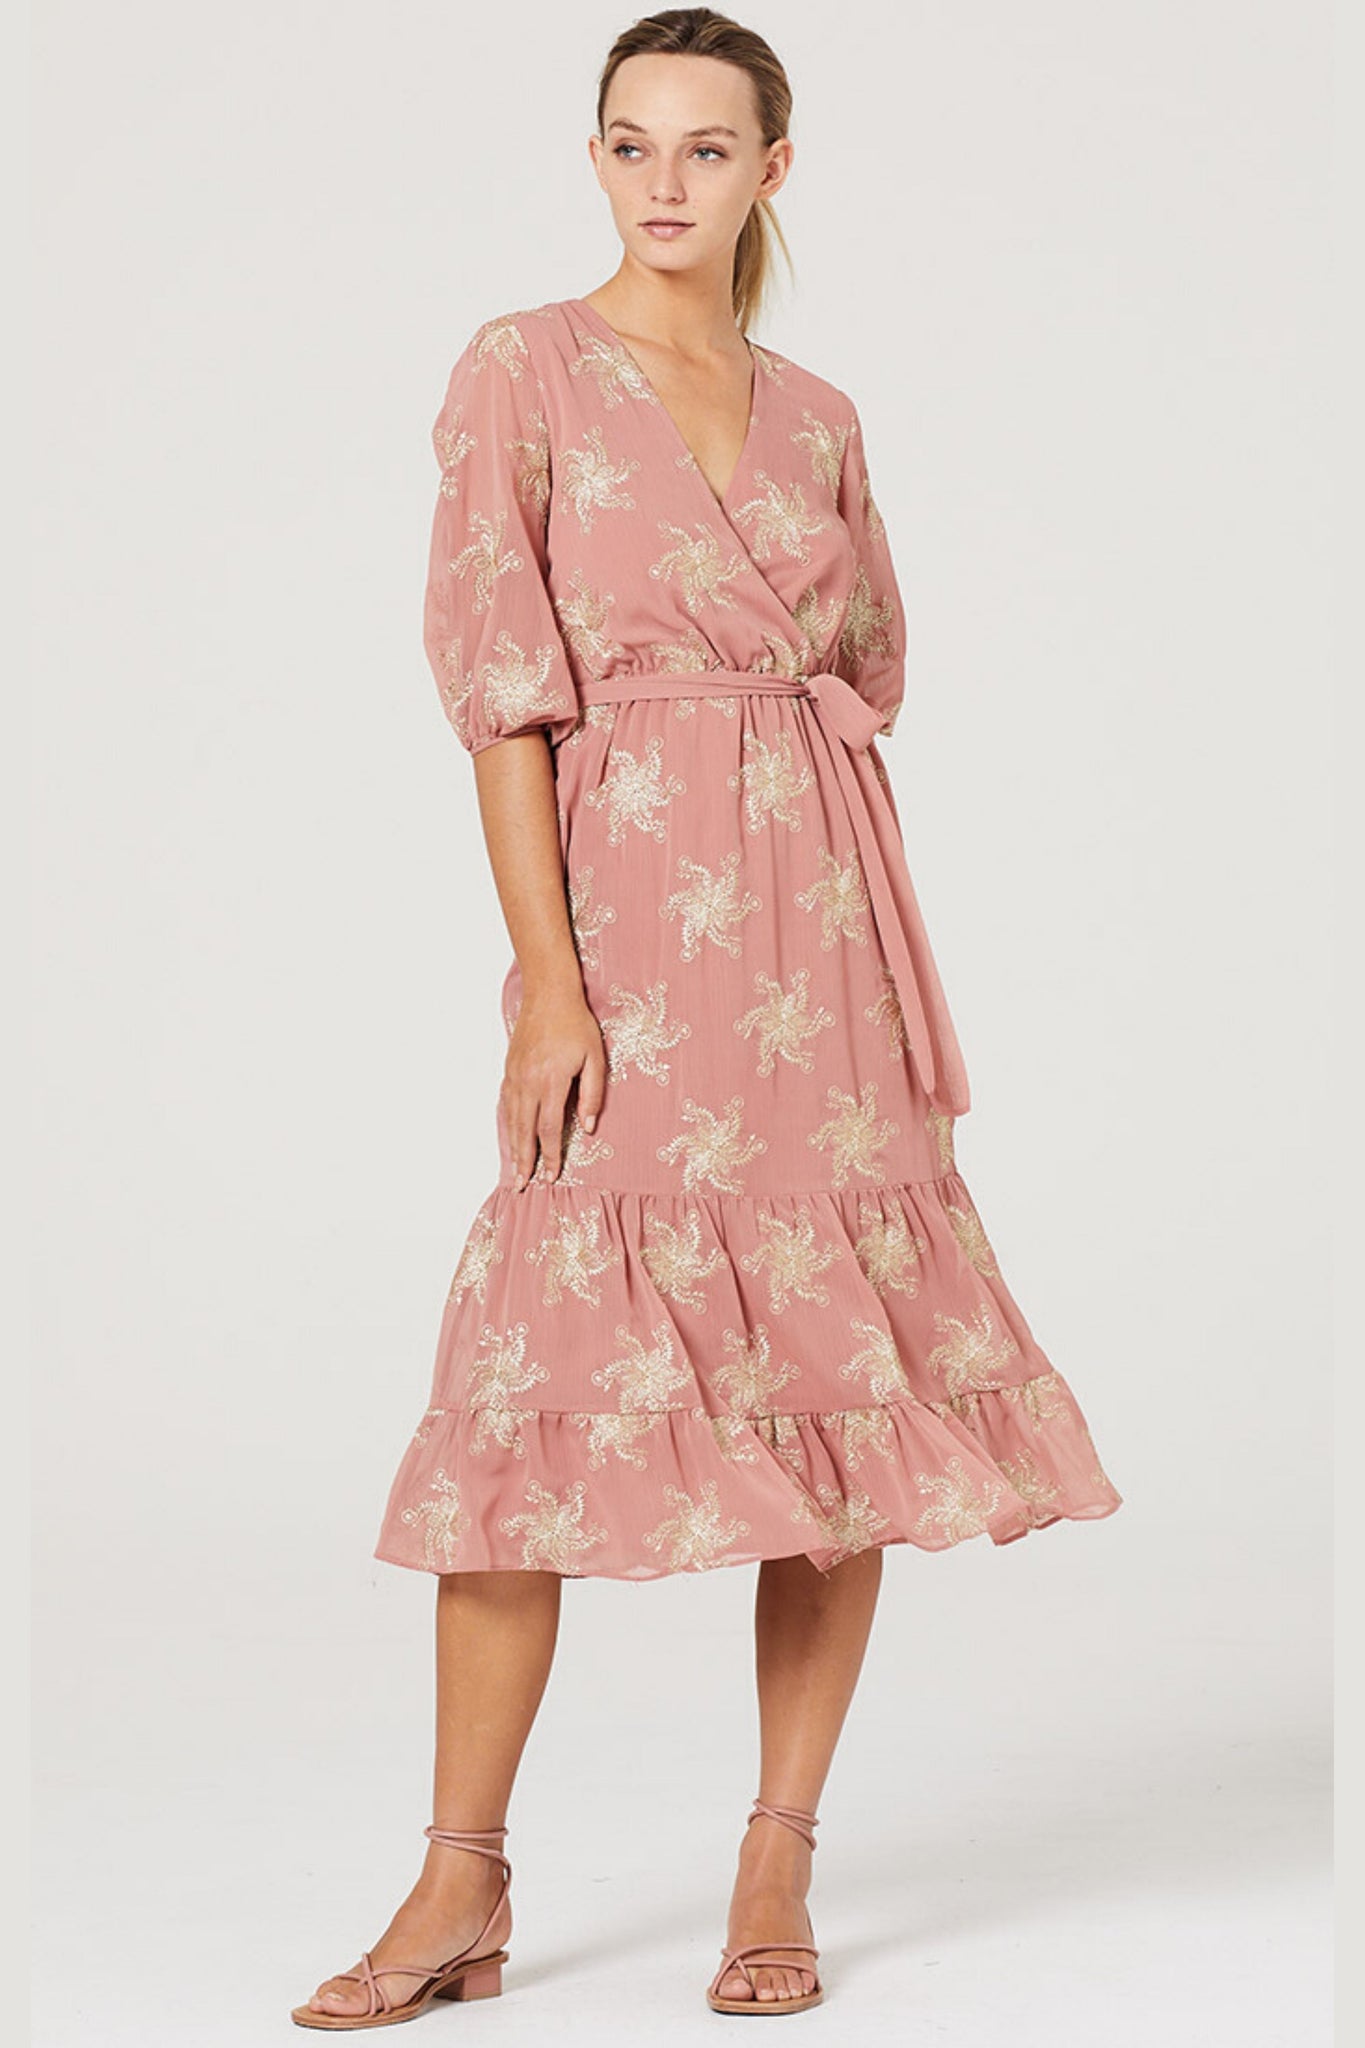 Buy Stevie May Porter Midi Dress online now at Smoke + Mirrors Boutique. Shop Stevie May Porter Midi with ZipPay and AfterPay. Stevie May Stockists Toowoomba. Stockist Australia. 